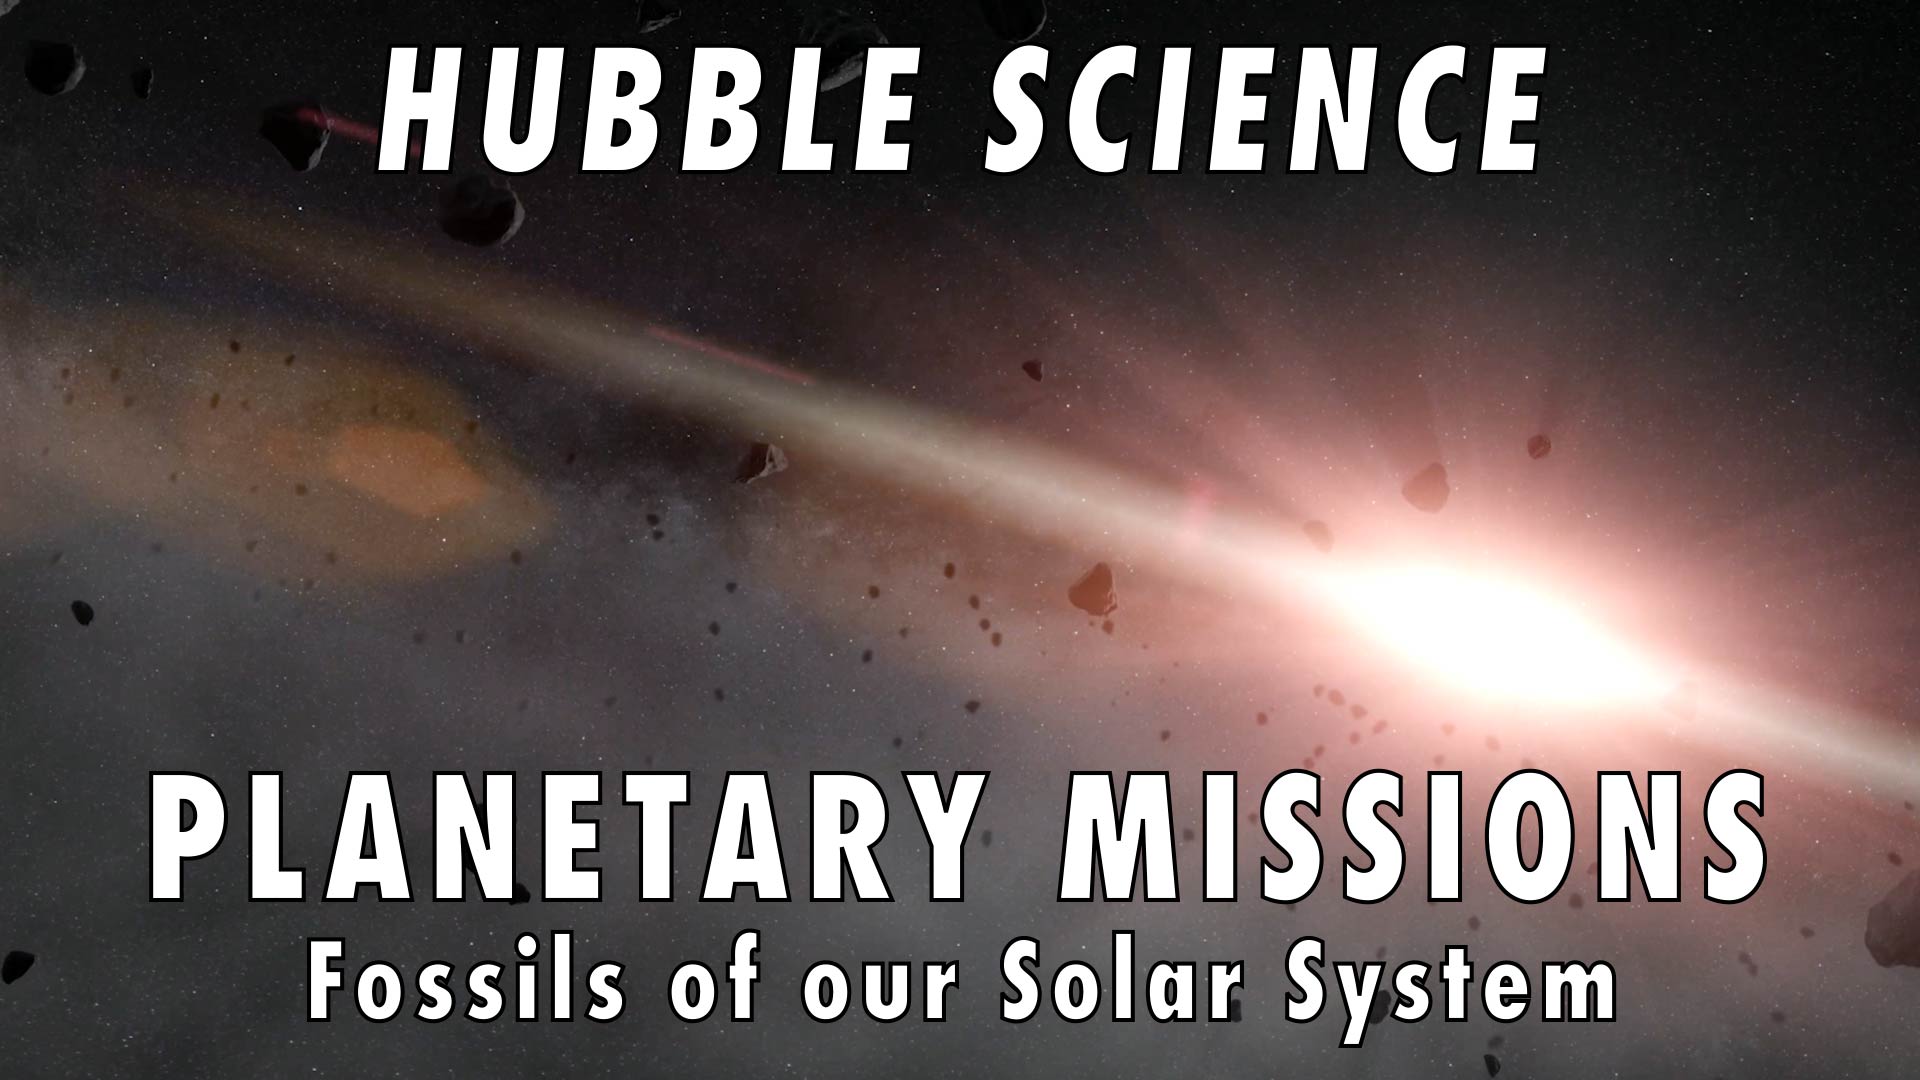 Preview Image for Hubble Science: Planetary Missions, Fossils of our Solar System